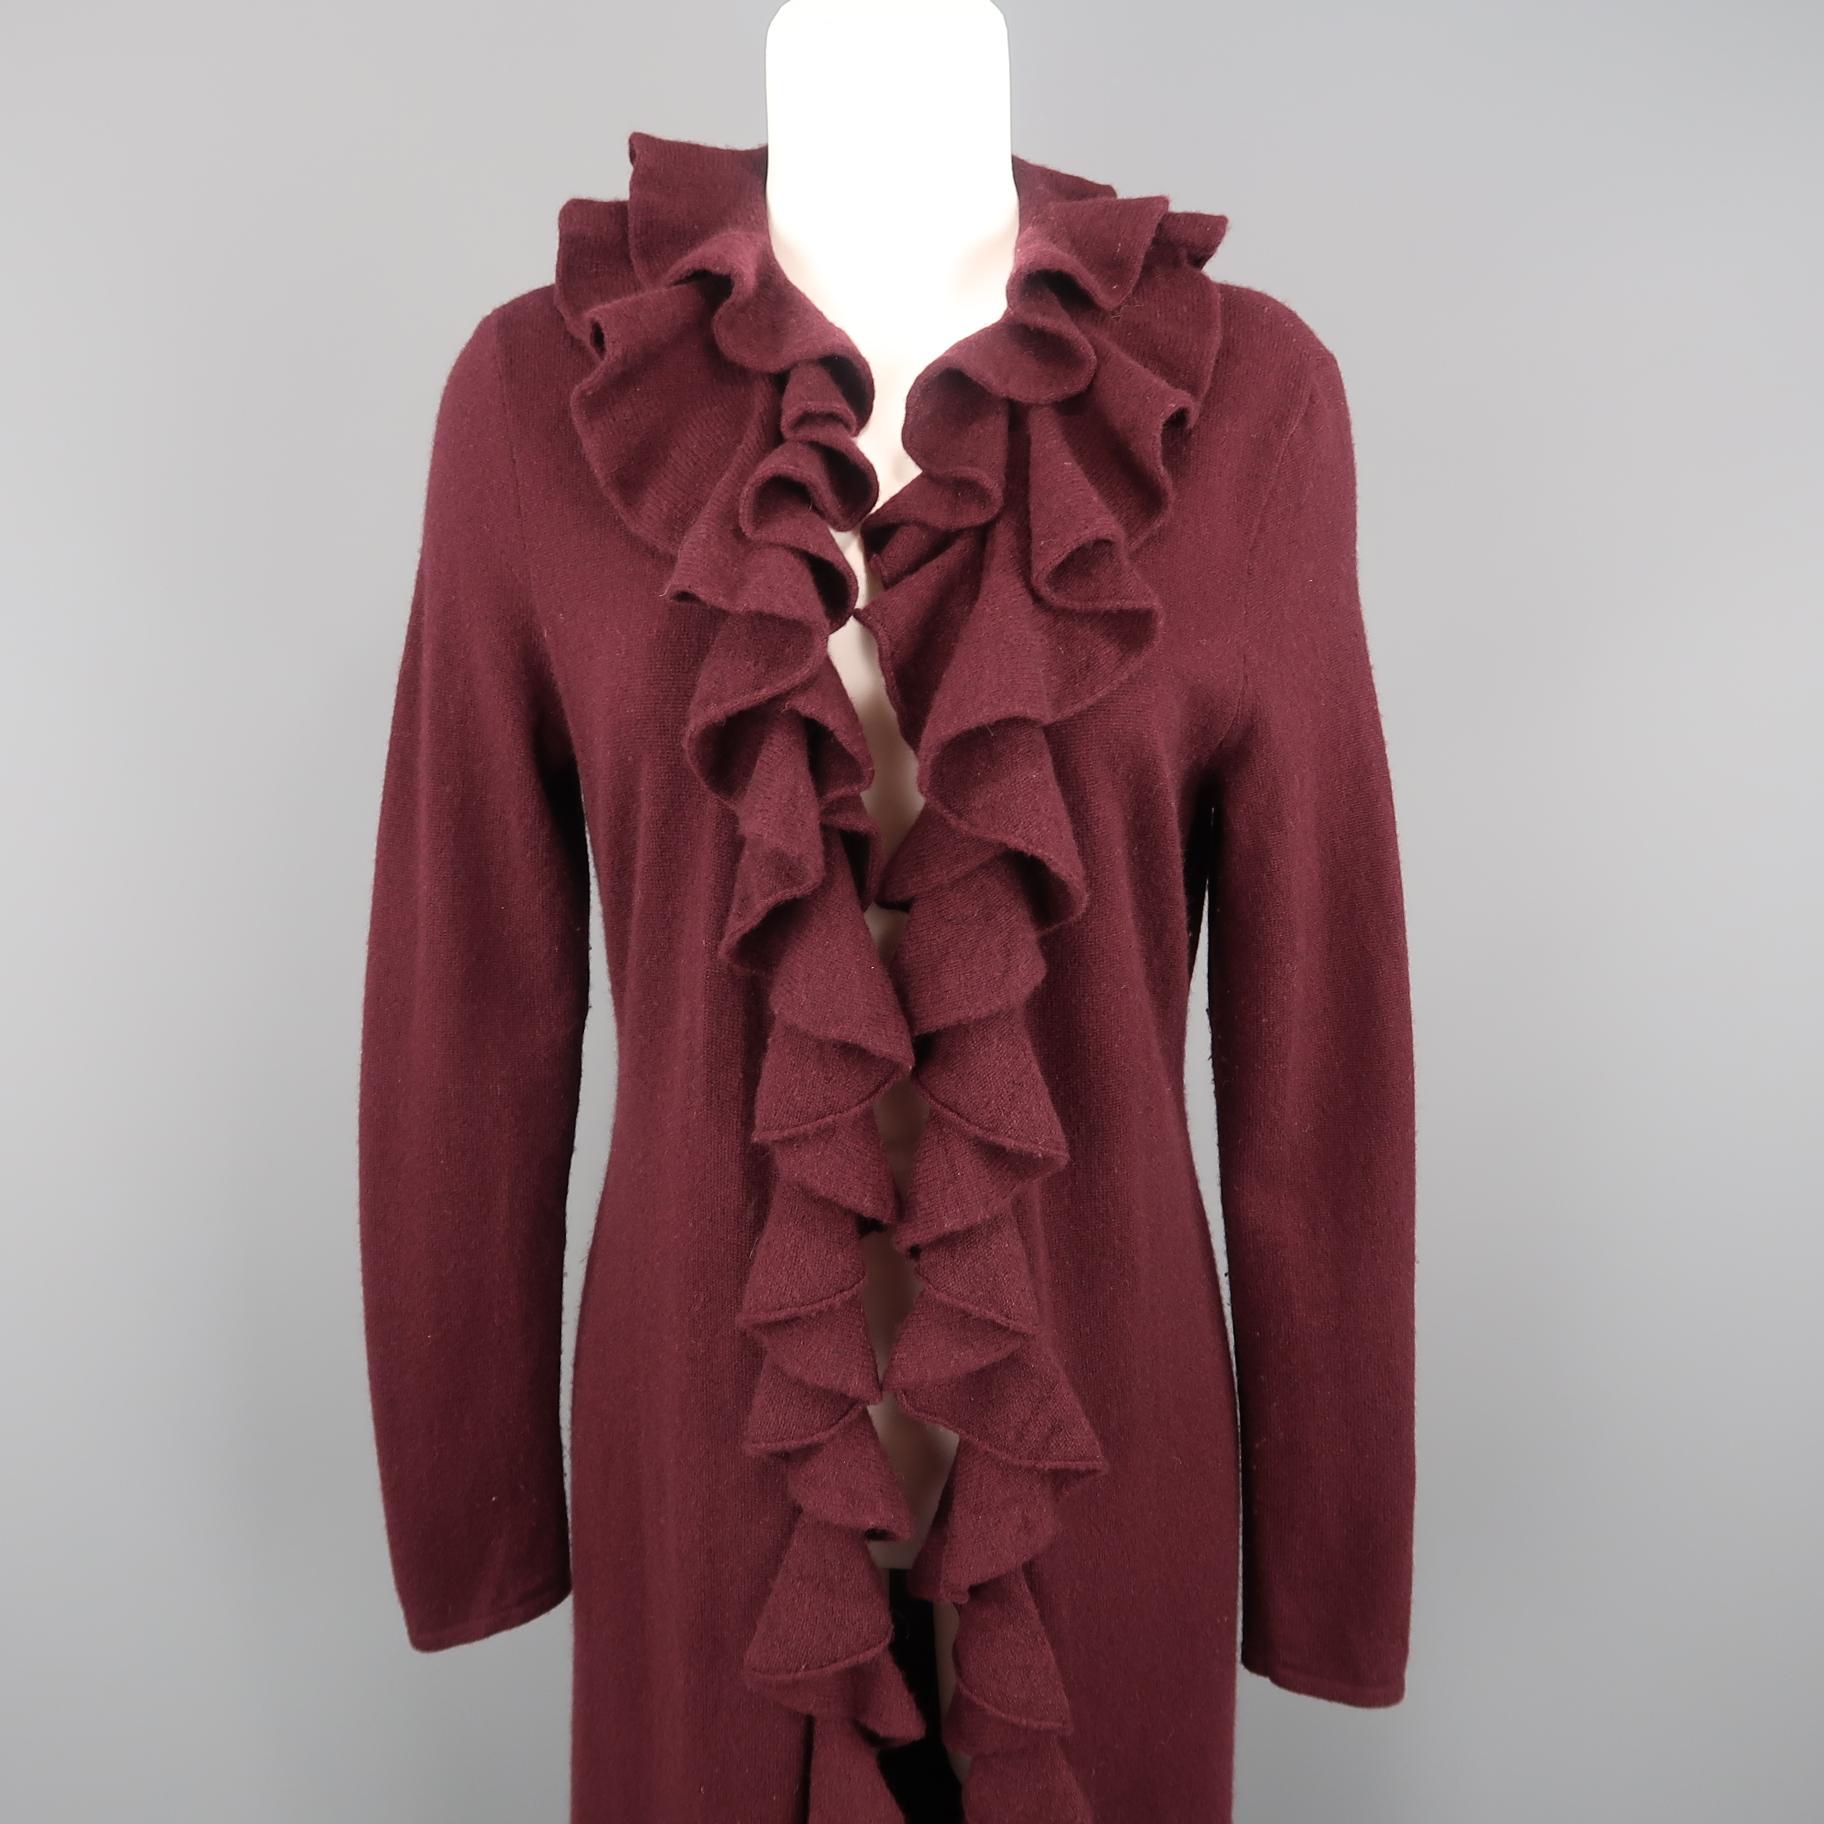 RALPH LAUREN BLACK LABEL cardigan coat comes in burgundy cashmere knit with an open front and ruffled collar and trim.
 
Very Good Pre-Owned Condition. Retails: $698.00.
Marked: L
 
Measurements:
 
Shoulder: 15 in.
Bust: 38 in.
Waist: 36 in.
Hip: 38